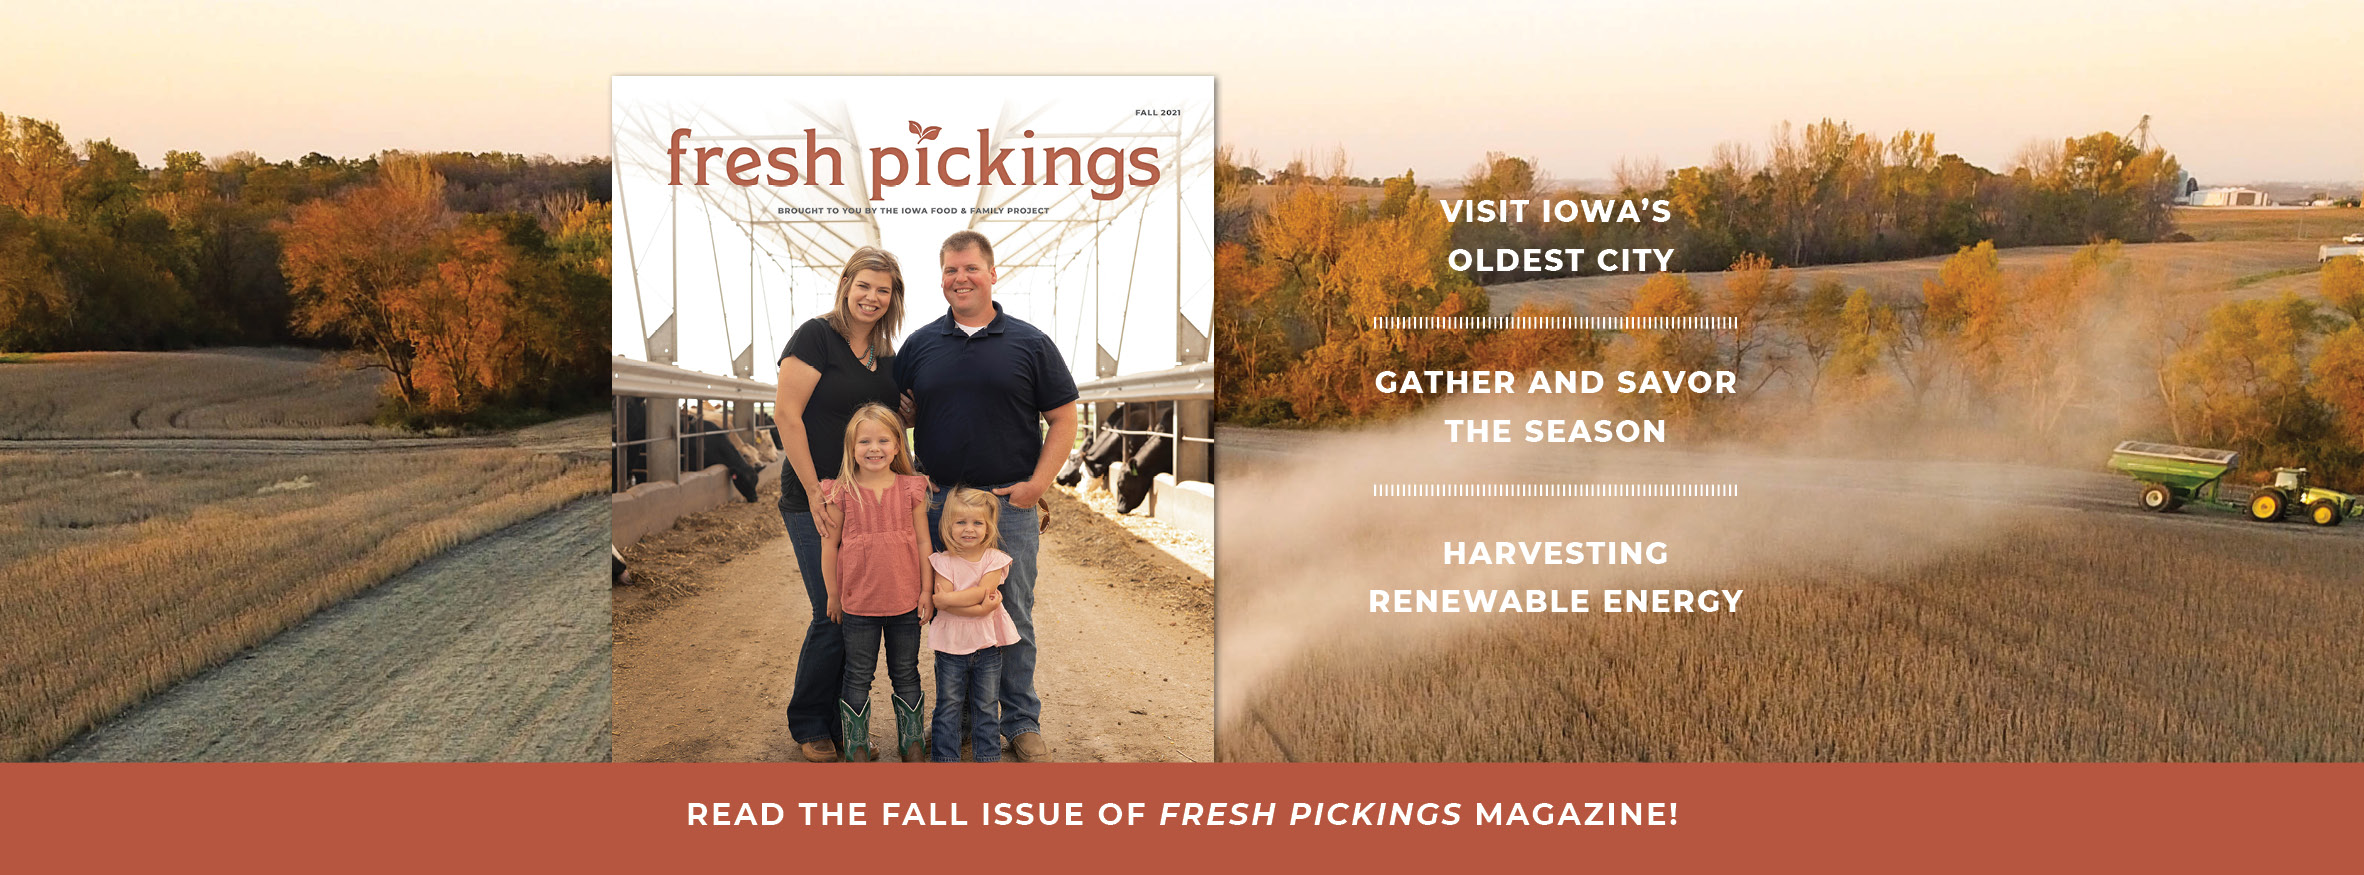 Read the Fall Issue of Fresh Pickings Magazine